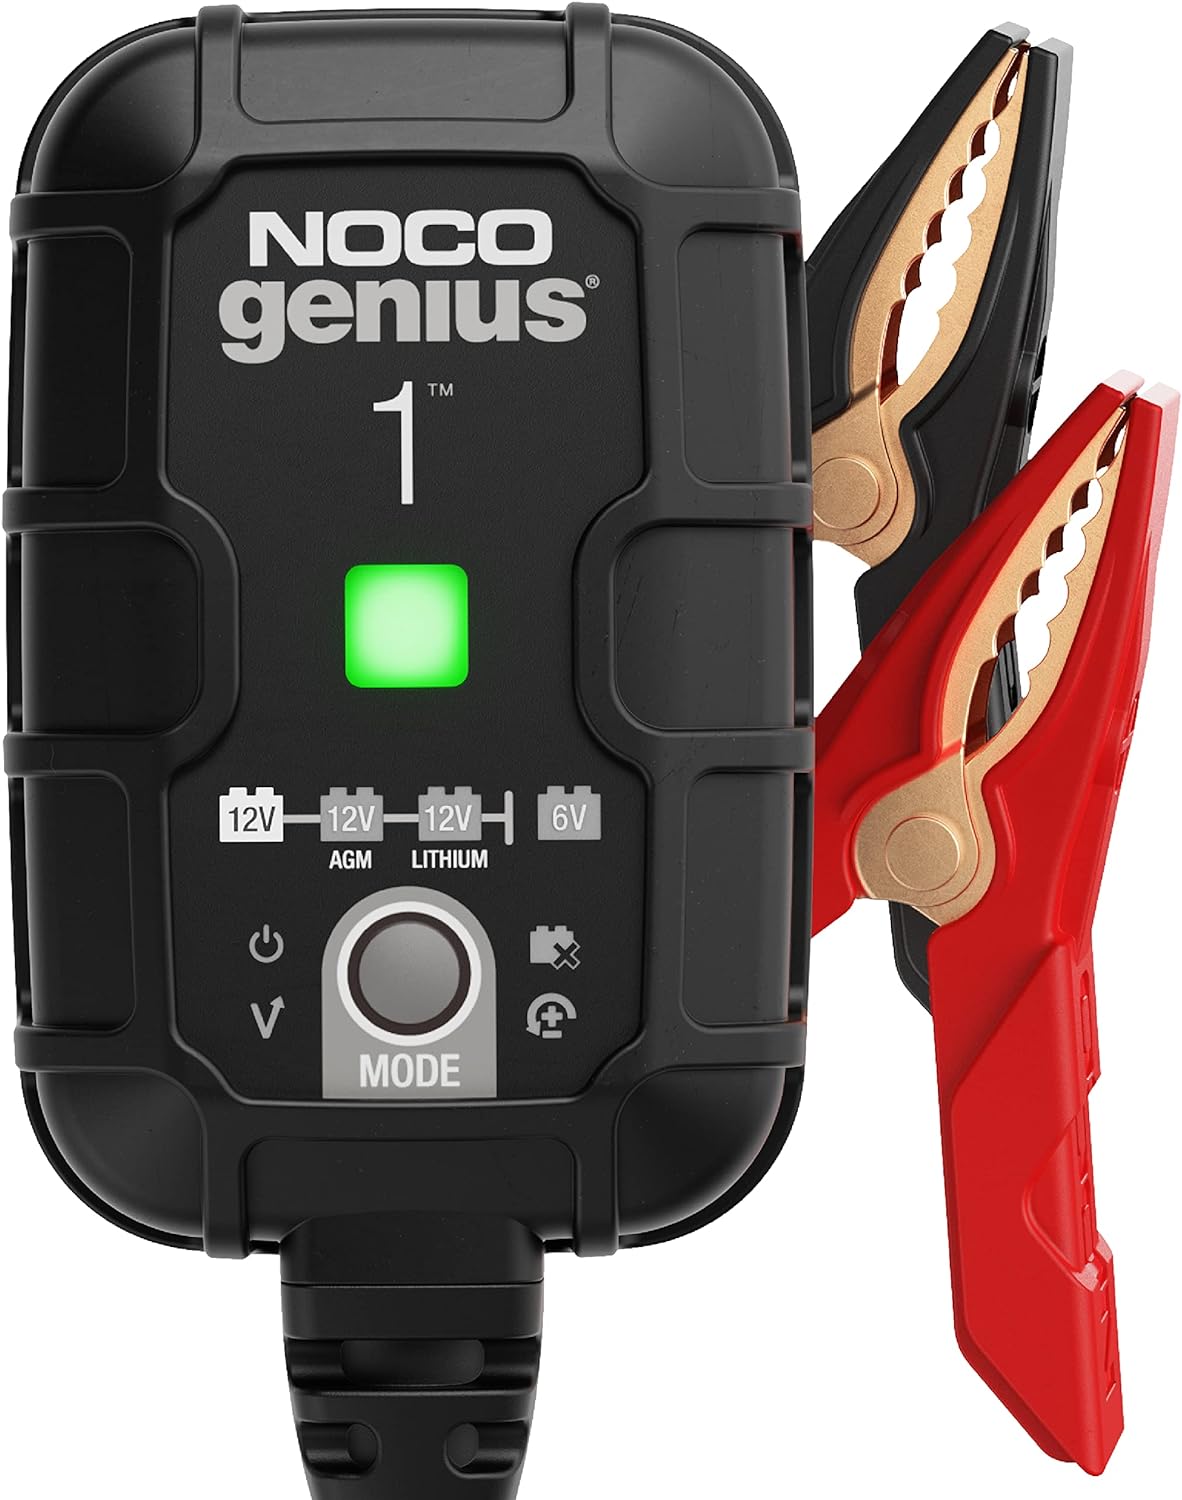 NOCO GENIUS1 Fully-Automatic Smart Battery Charger